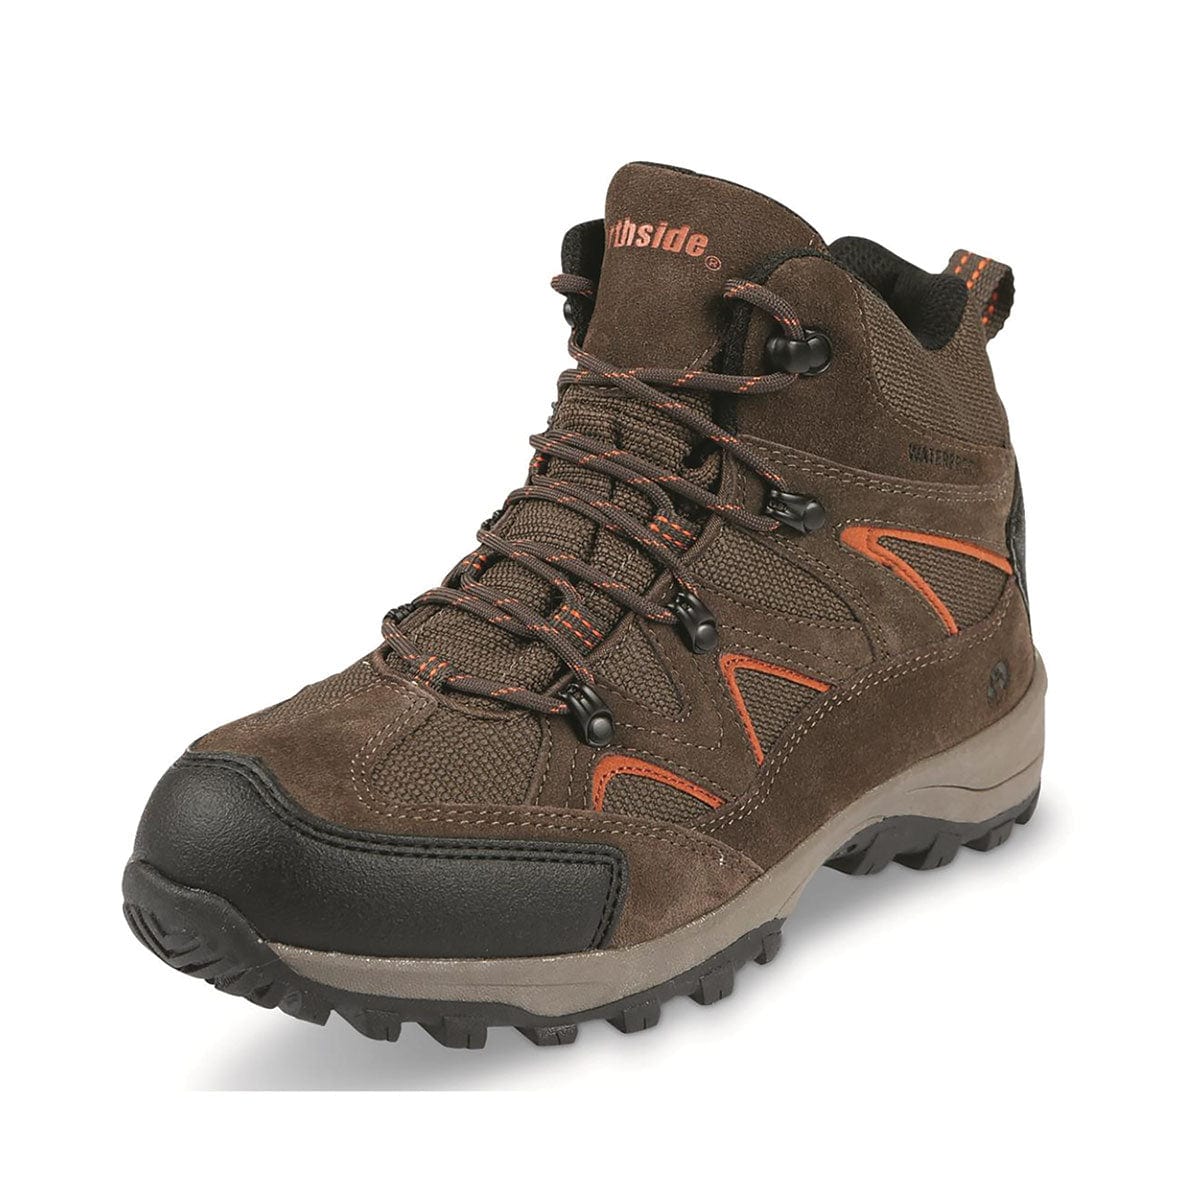 Northside Snohomish 6" Mid Waterproof Hiking Boots